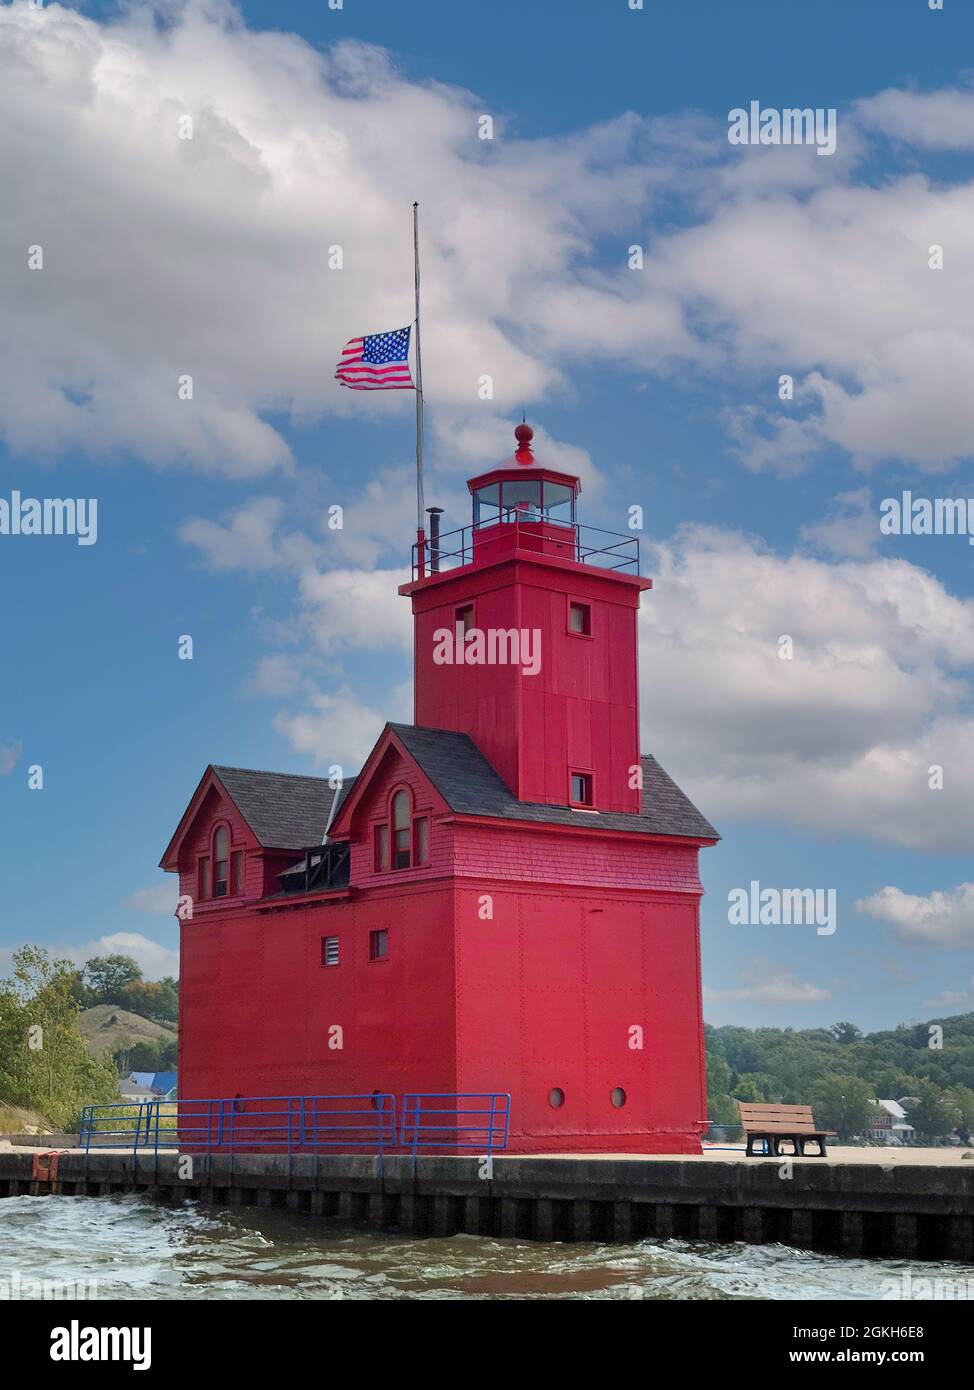 Big Red lighthouse at Holland Harbor in Holland, Michigan with American flag at half-mast Stock Photo